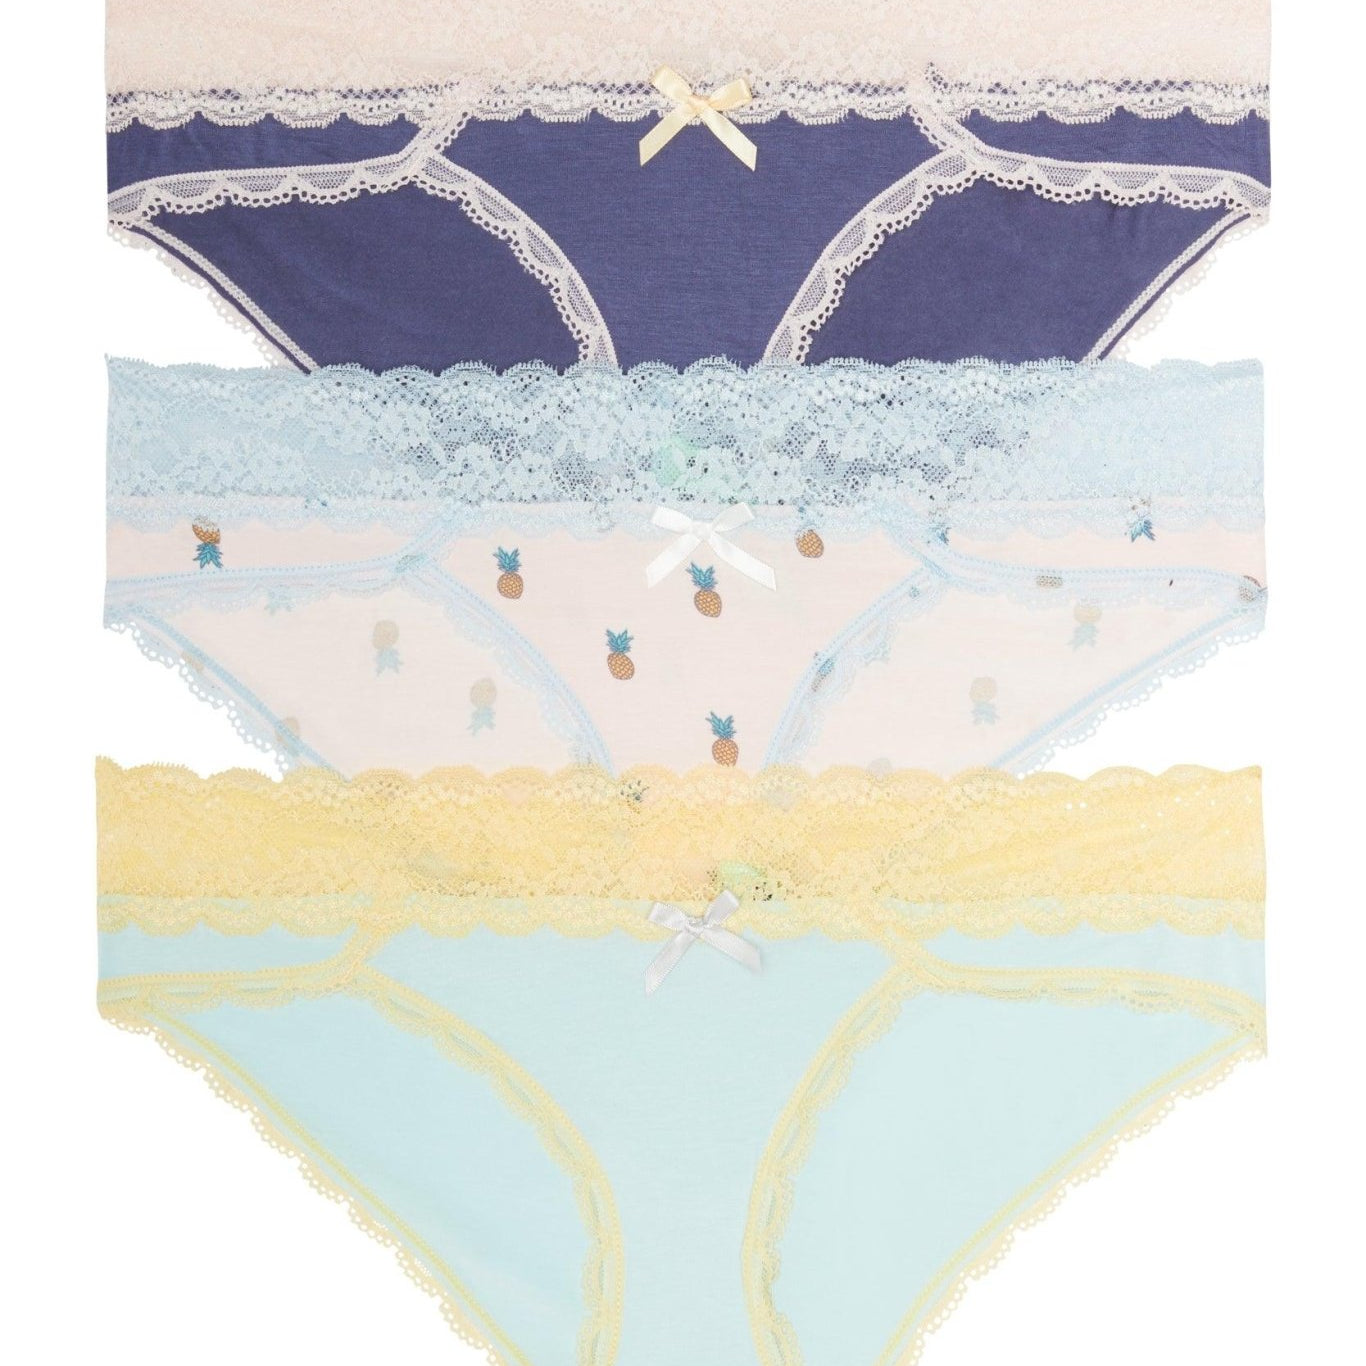 Ahna Hipster 3-Pack - Panty - Cape Town Sand Bar Pineapples Starry Sky